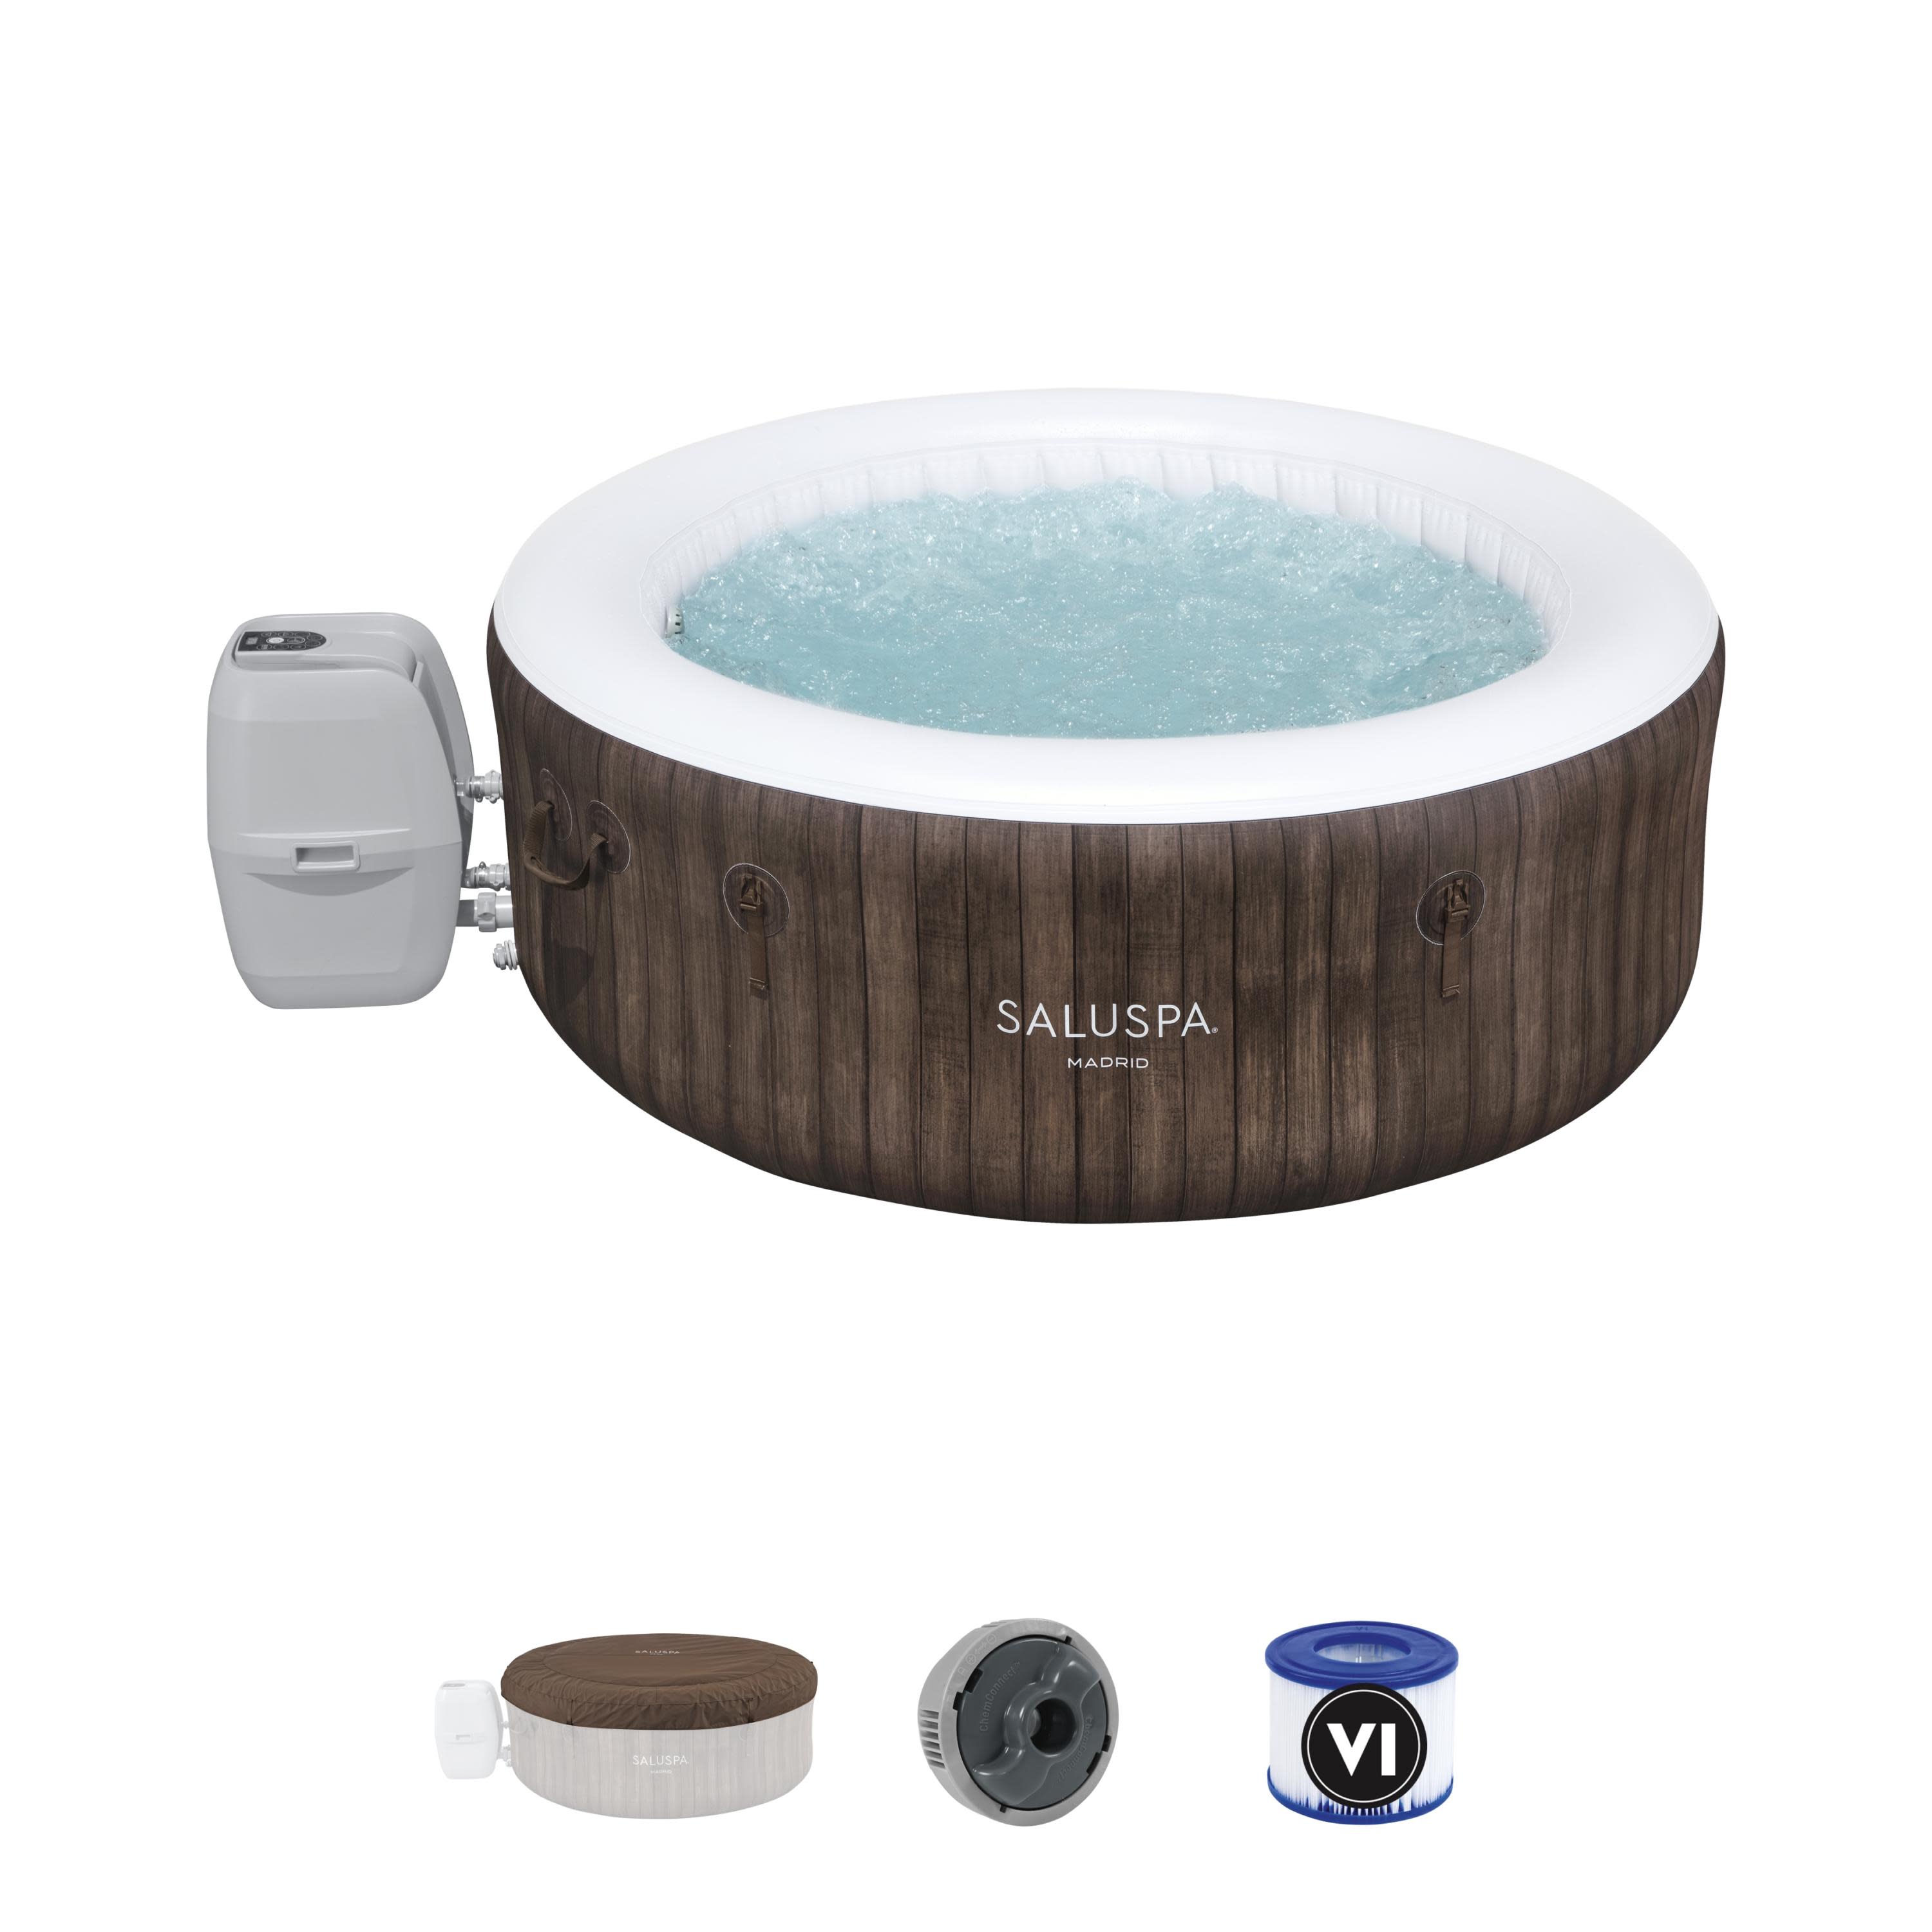 Bestway SaluSpa 71 in. x 26 in. Madrid 177 Gal Inflatable Hot Tub, 104˚F Max Temperature - image 5 of 9